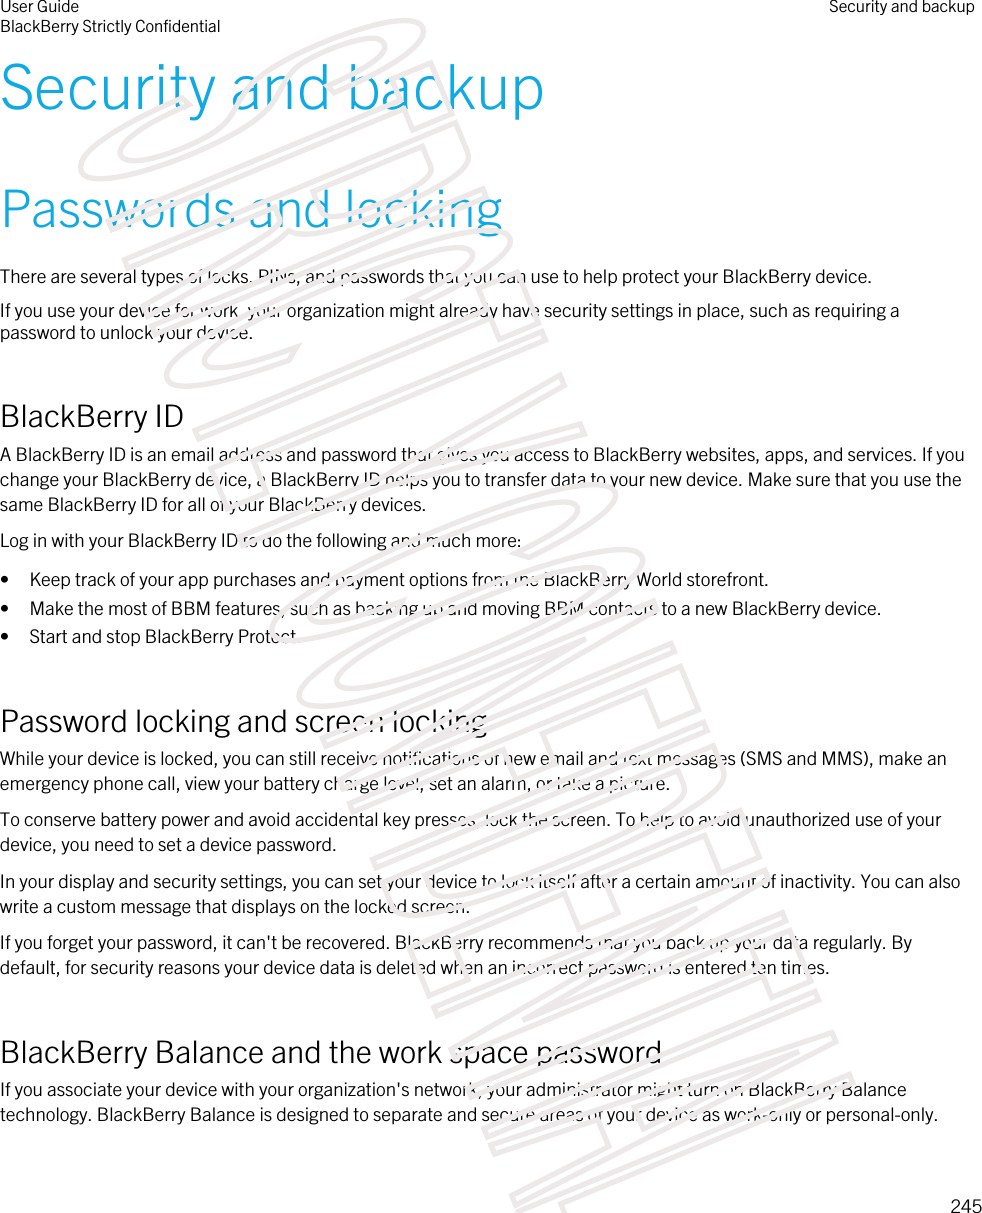 Security and backupPasswords and lockingThere are several types of locks, PINs, and passwords that you can use to help protect your BlackBerry device.If you use your device for work, your organization might already have security settings in place, such as requiring a password to unlock your device.BlackBerry IDA BlackBerry ID is an email address and password that gives you access to BlackBerry websites, apps, and services. If you change your BlackBerry device, a BlackBerry ID helps you to transfer data to your new device. Make sure that you use the same BlackBerry ID for all of your BlackBerry devices.Log in with your BlackBerry ID to do the following and much more:• Keep track of your app purchases and payment options from the BlackBerry World storefront.• Make the most of BBM features, such as backing up and moving BBM contacts to a new BlackBerry device.• Start and stop BlackBerry Protect.Password locking and screen lockingWhile your device is locked, you can still receive notifications of new email and text messages (SMS and MMS), make an emergency phone call, view your battery charge level, set an alarm, or take a picture.To conserve battery power and avoid accidental key presses, lock the screen. To help to avoid unauthorized use of your device, you need to set a device password.In your display and security settings, you can set your device to lock itself after a certain amount of inactivity. You can also write a custom message that displays on the locked screen.If you forget your password, it can&apos;t be recovered. BlackBerry recommends that you back up your data regularly. By default, for security reasons your device data is deleted when an incorrect password is entered ten times.BlackBerry Balance and the work space passwordIf you associate your device with your organization&apos;s network, your administrator might turn on BlackBerry Balance technology. BlackBerry Balance is designed to separate and secure areas of your device as work-only or personal-only.User GuideBlackBerry Strictly ConfidentialSecurity and backup245STRICTLY CONFIDENTIAL